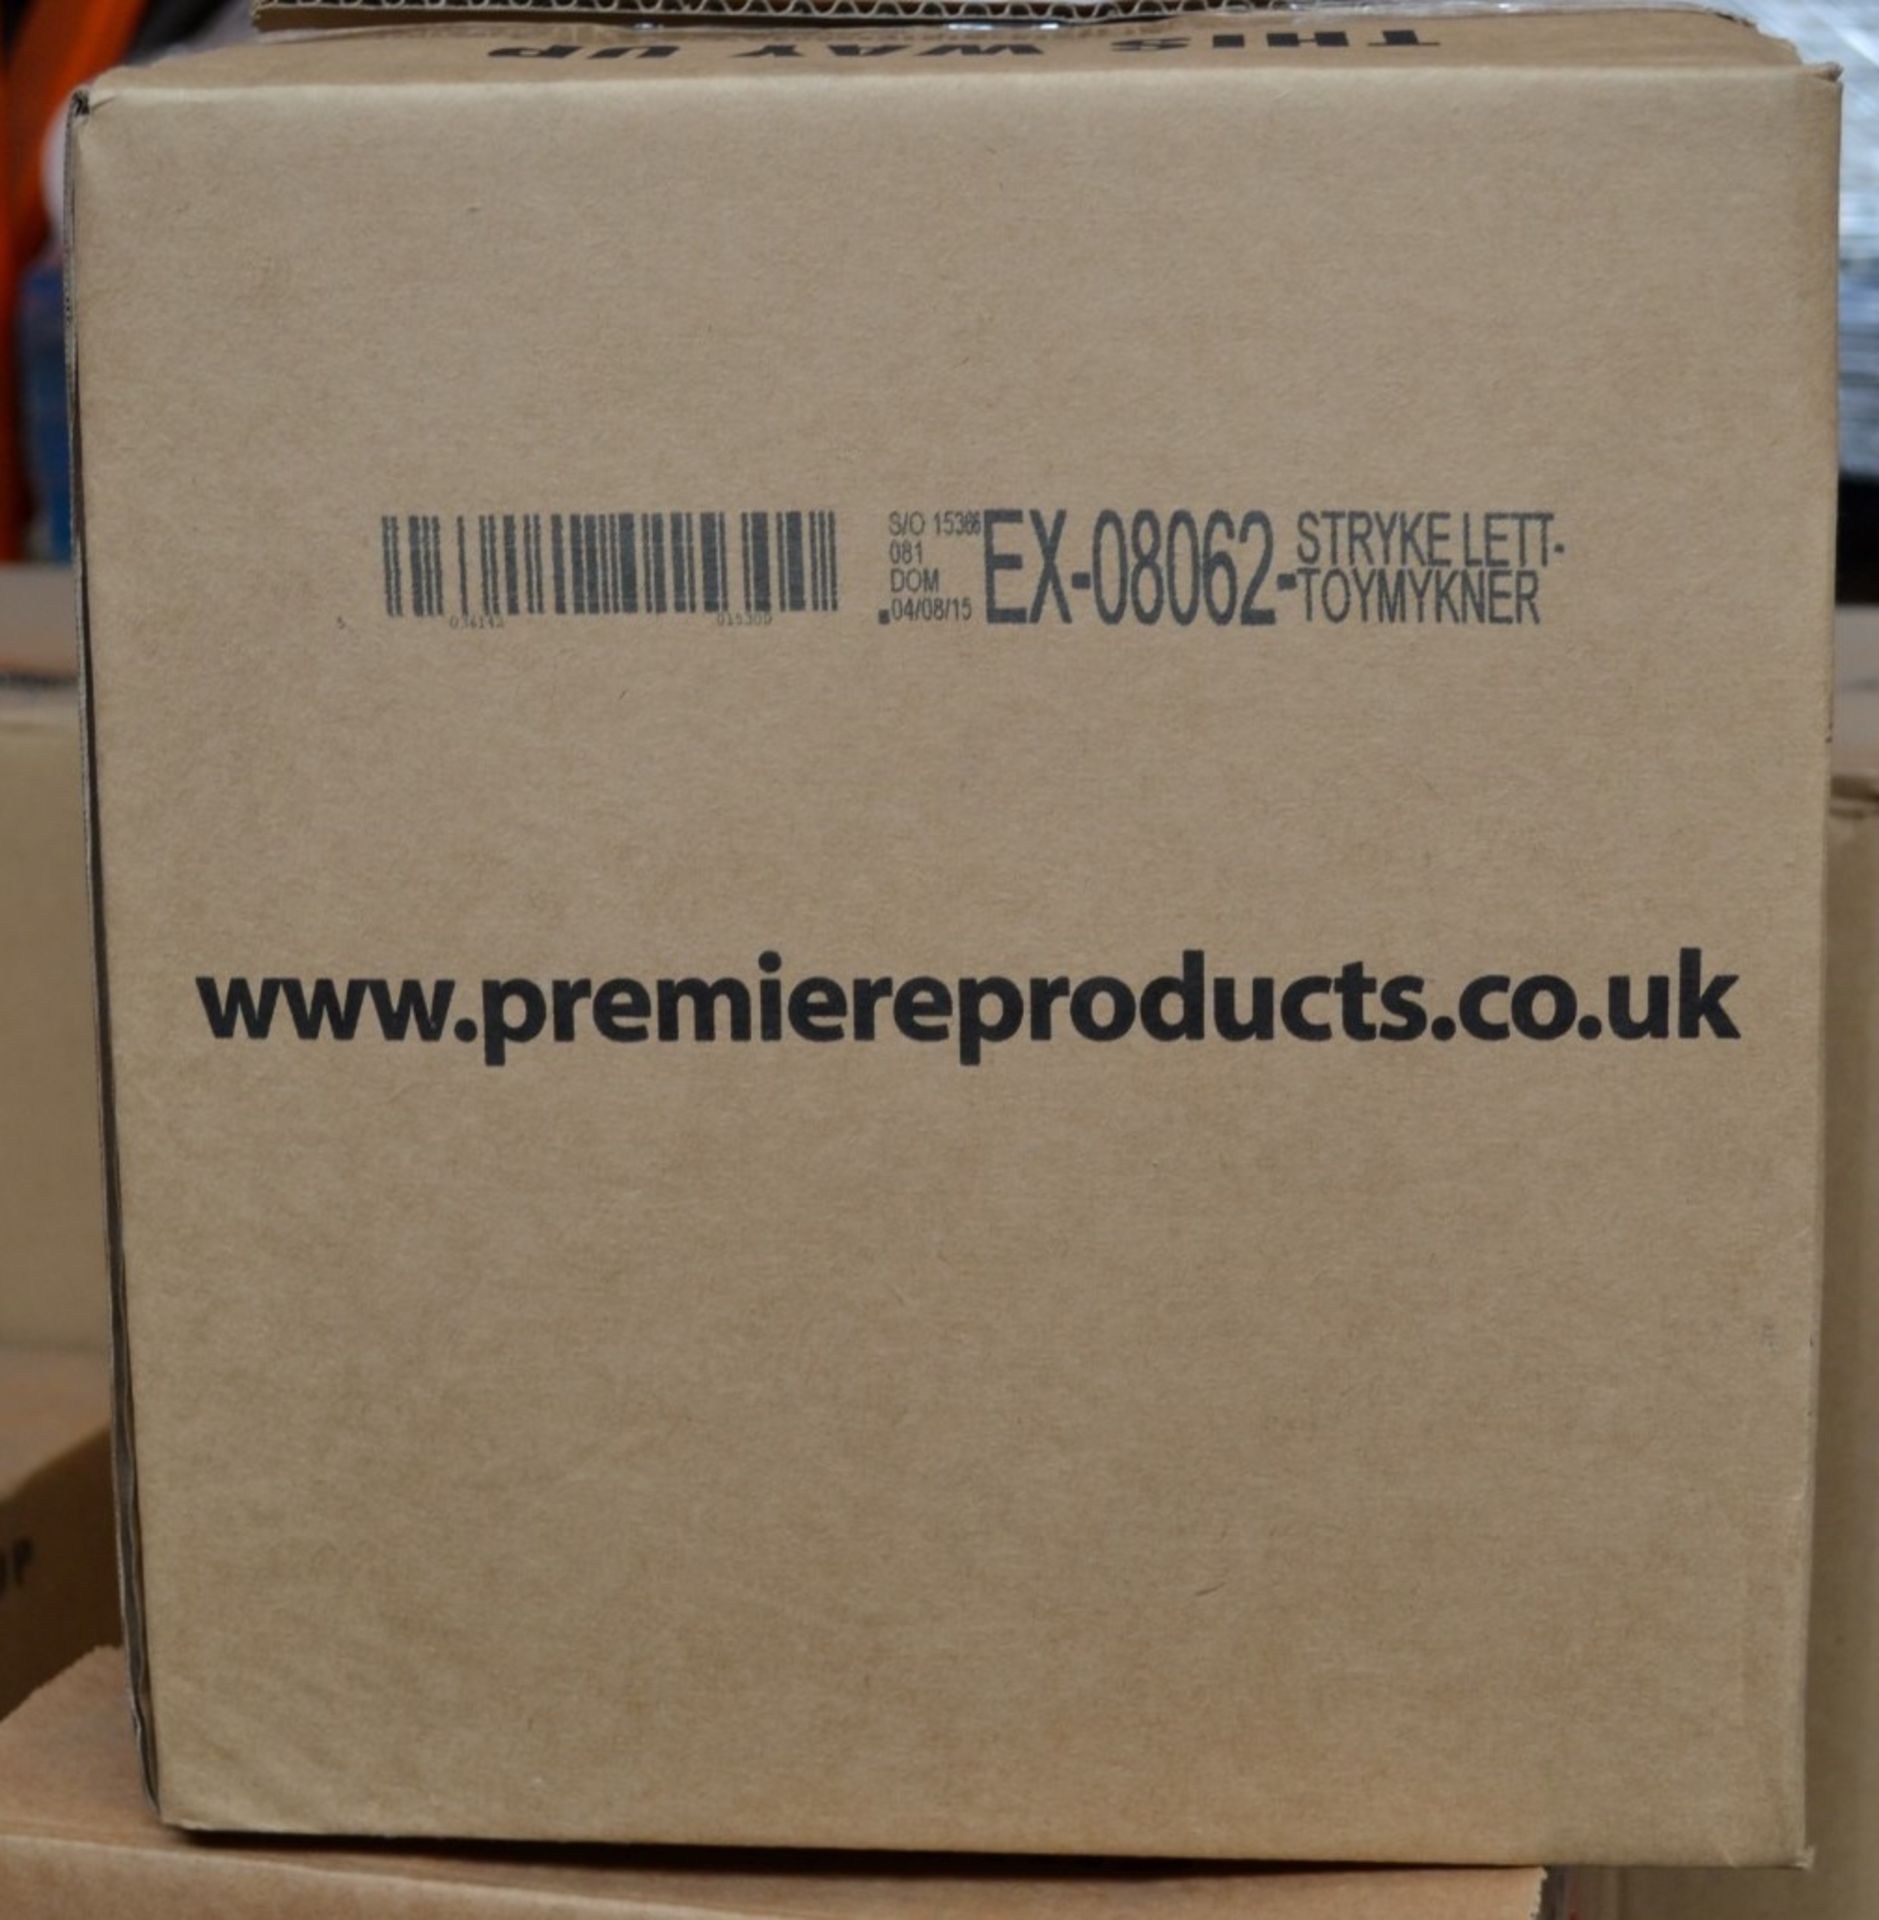 2 x 5ltr Premiere Products Easy Iron fabric conditioner - New Boxed Stock - CL083 - Ref 08062 - - Image 6 of 6